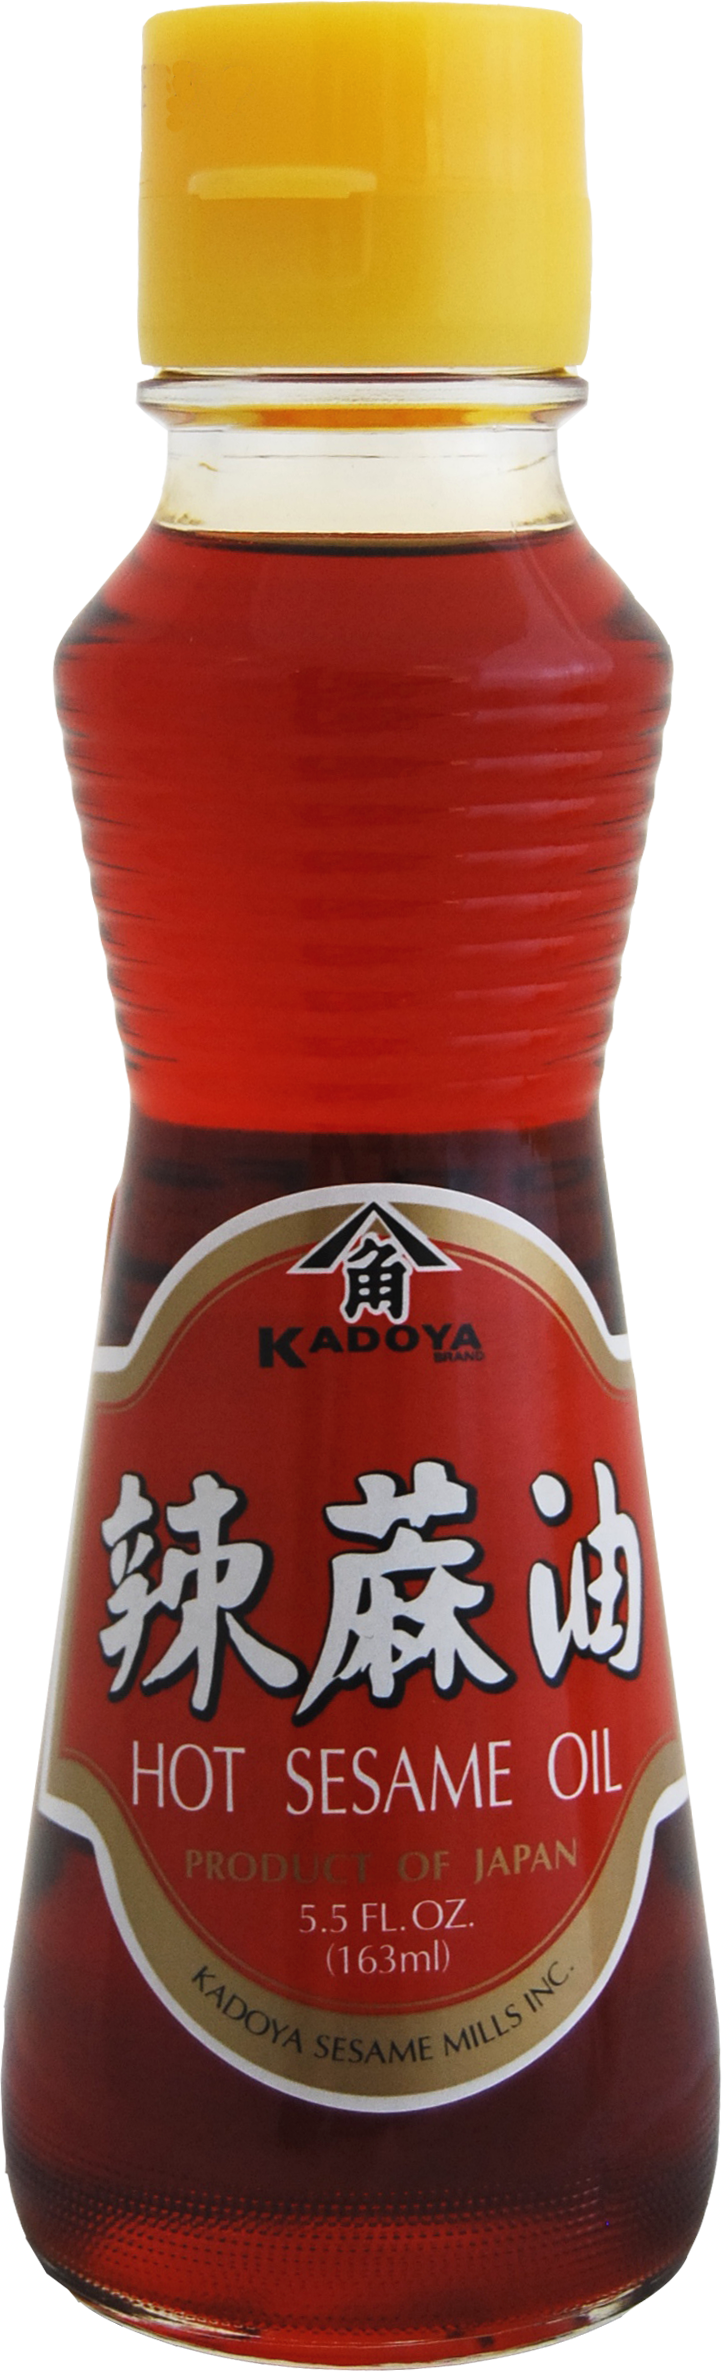 Hot Sesame Oil, Toasted with Chili Extract, Kadoya Premium Quality, JP